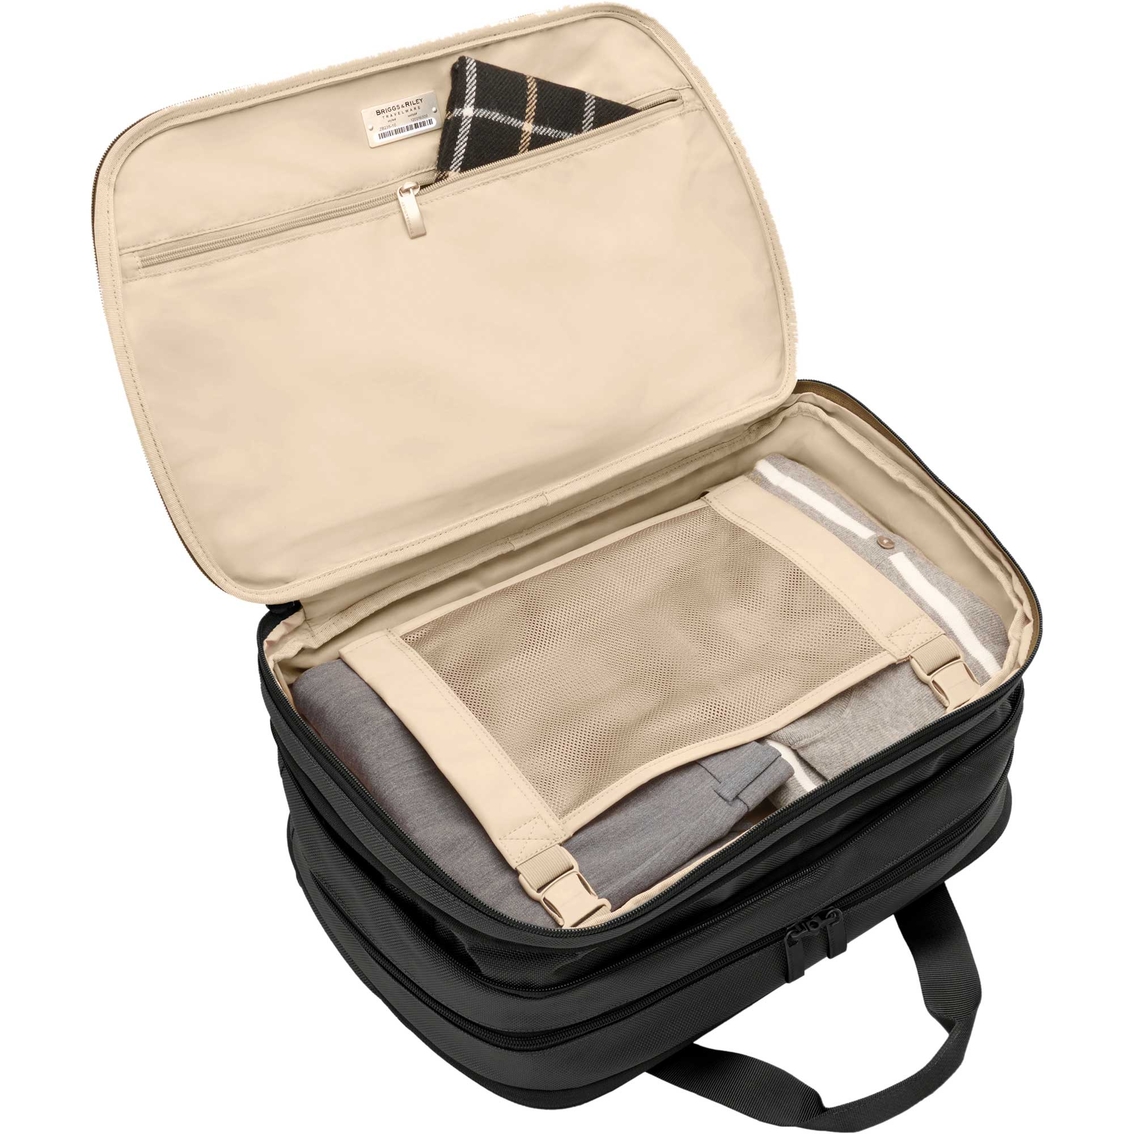 Briggs & Riley Baseline Expandable Cabin Bag - Image 3 of 9